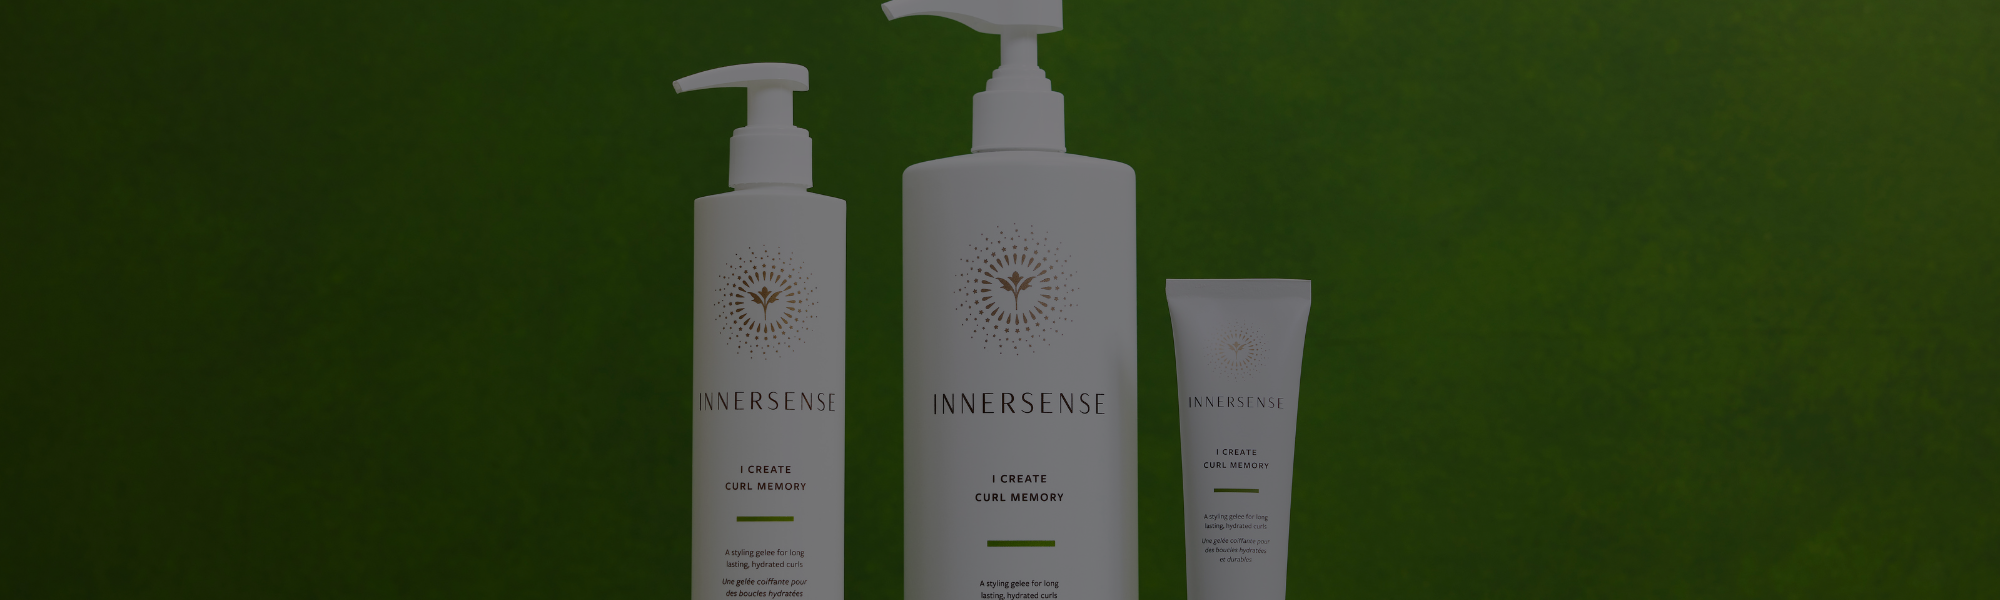 INNERSENSE Organic Beauty - Natural I Create Definition Styling Foam, Clean Haircare For Long-Lasting Curls (6 fl oz